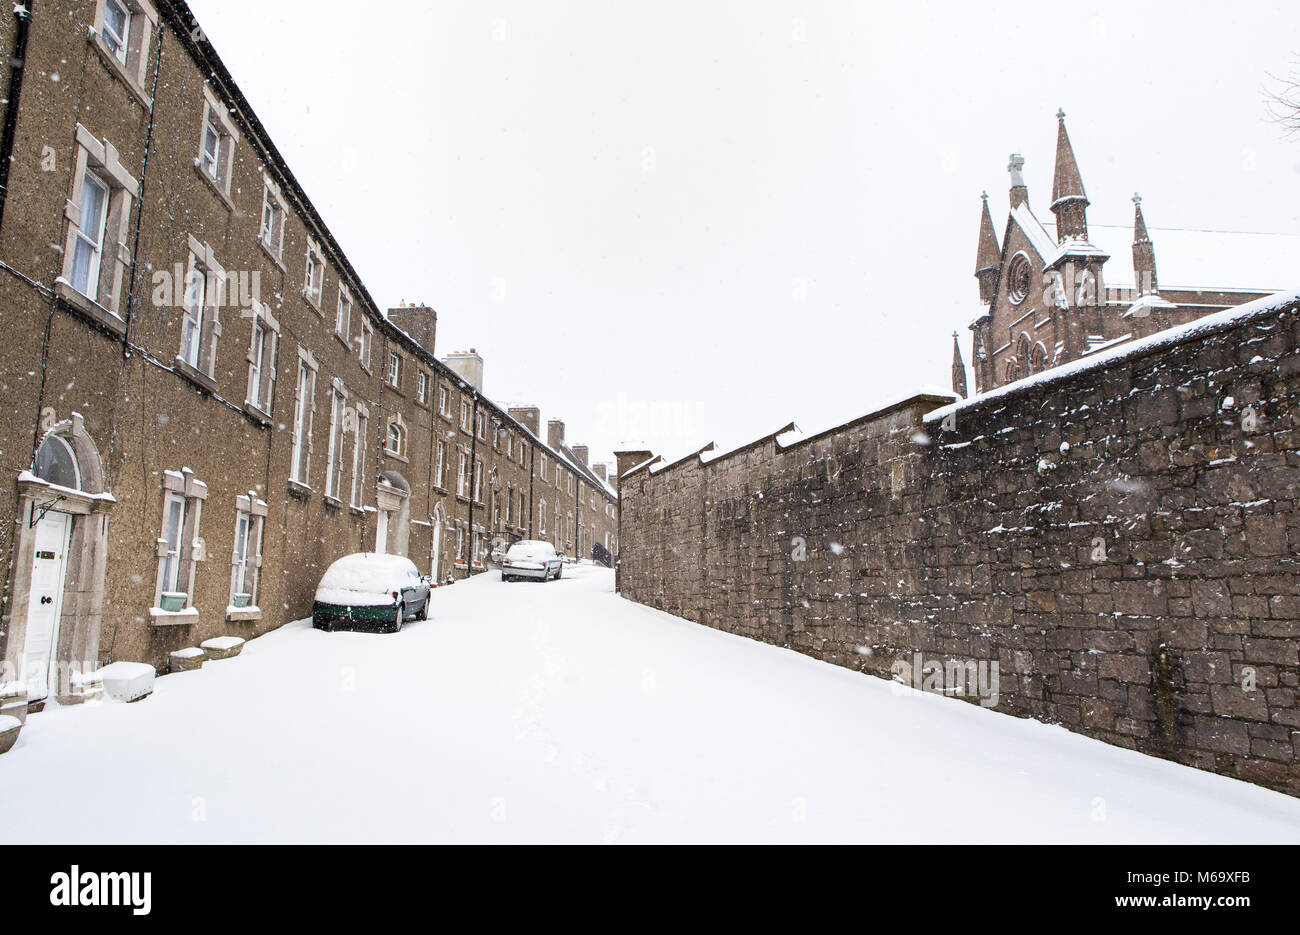 Armagh, Northern Ireland. 1st Mar, 2018. Vicar's Hill, Armagh City, Northern Ireland in snow, March 1st 2018. The Georgian architecture is characteristic of Armagh. Credit: Darren McLoughlin/Alamy Live News Stock Photo